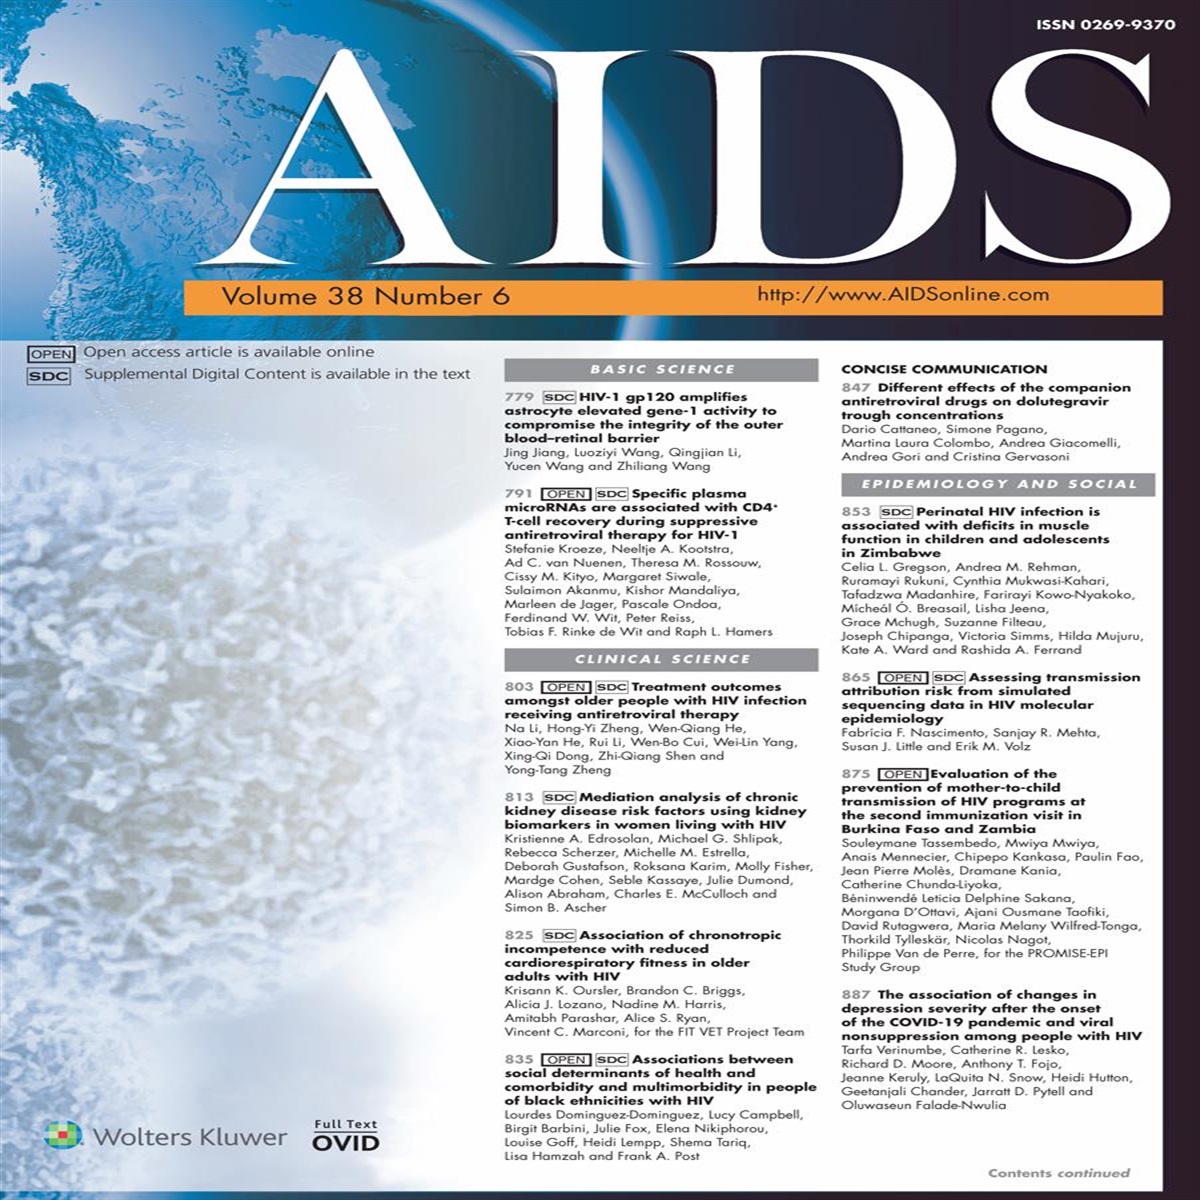 Sex differences in incident atherosclerotic cardiovascular disease events among women and men with HIV: Erratum